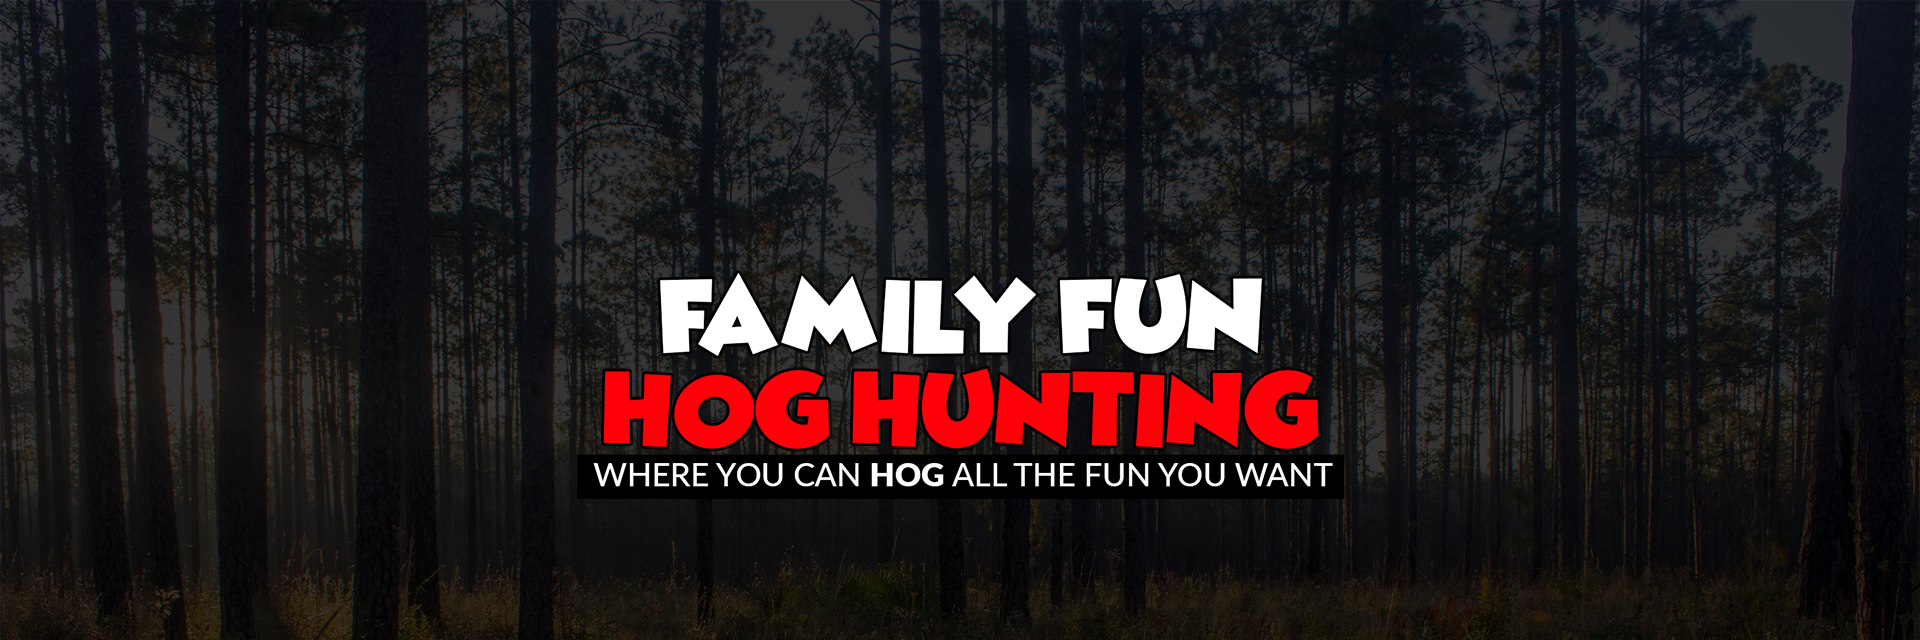 Family Fun Hog Hunting logo and illustration in white and red text